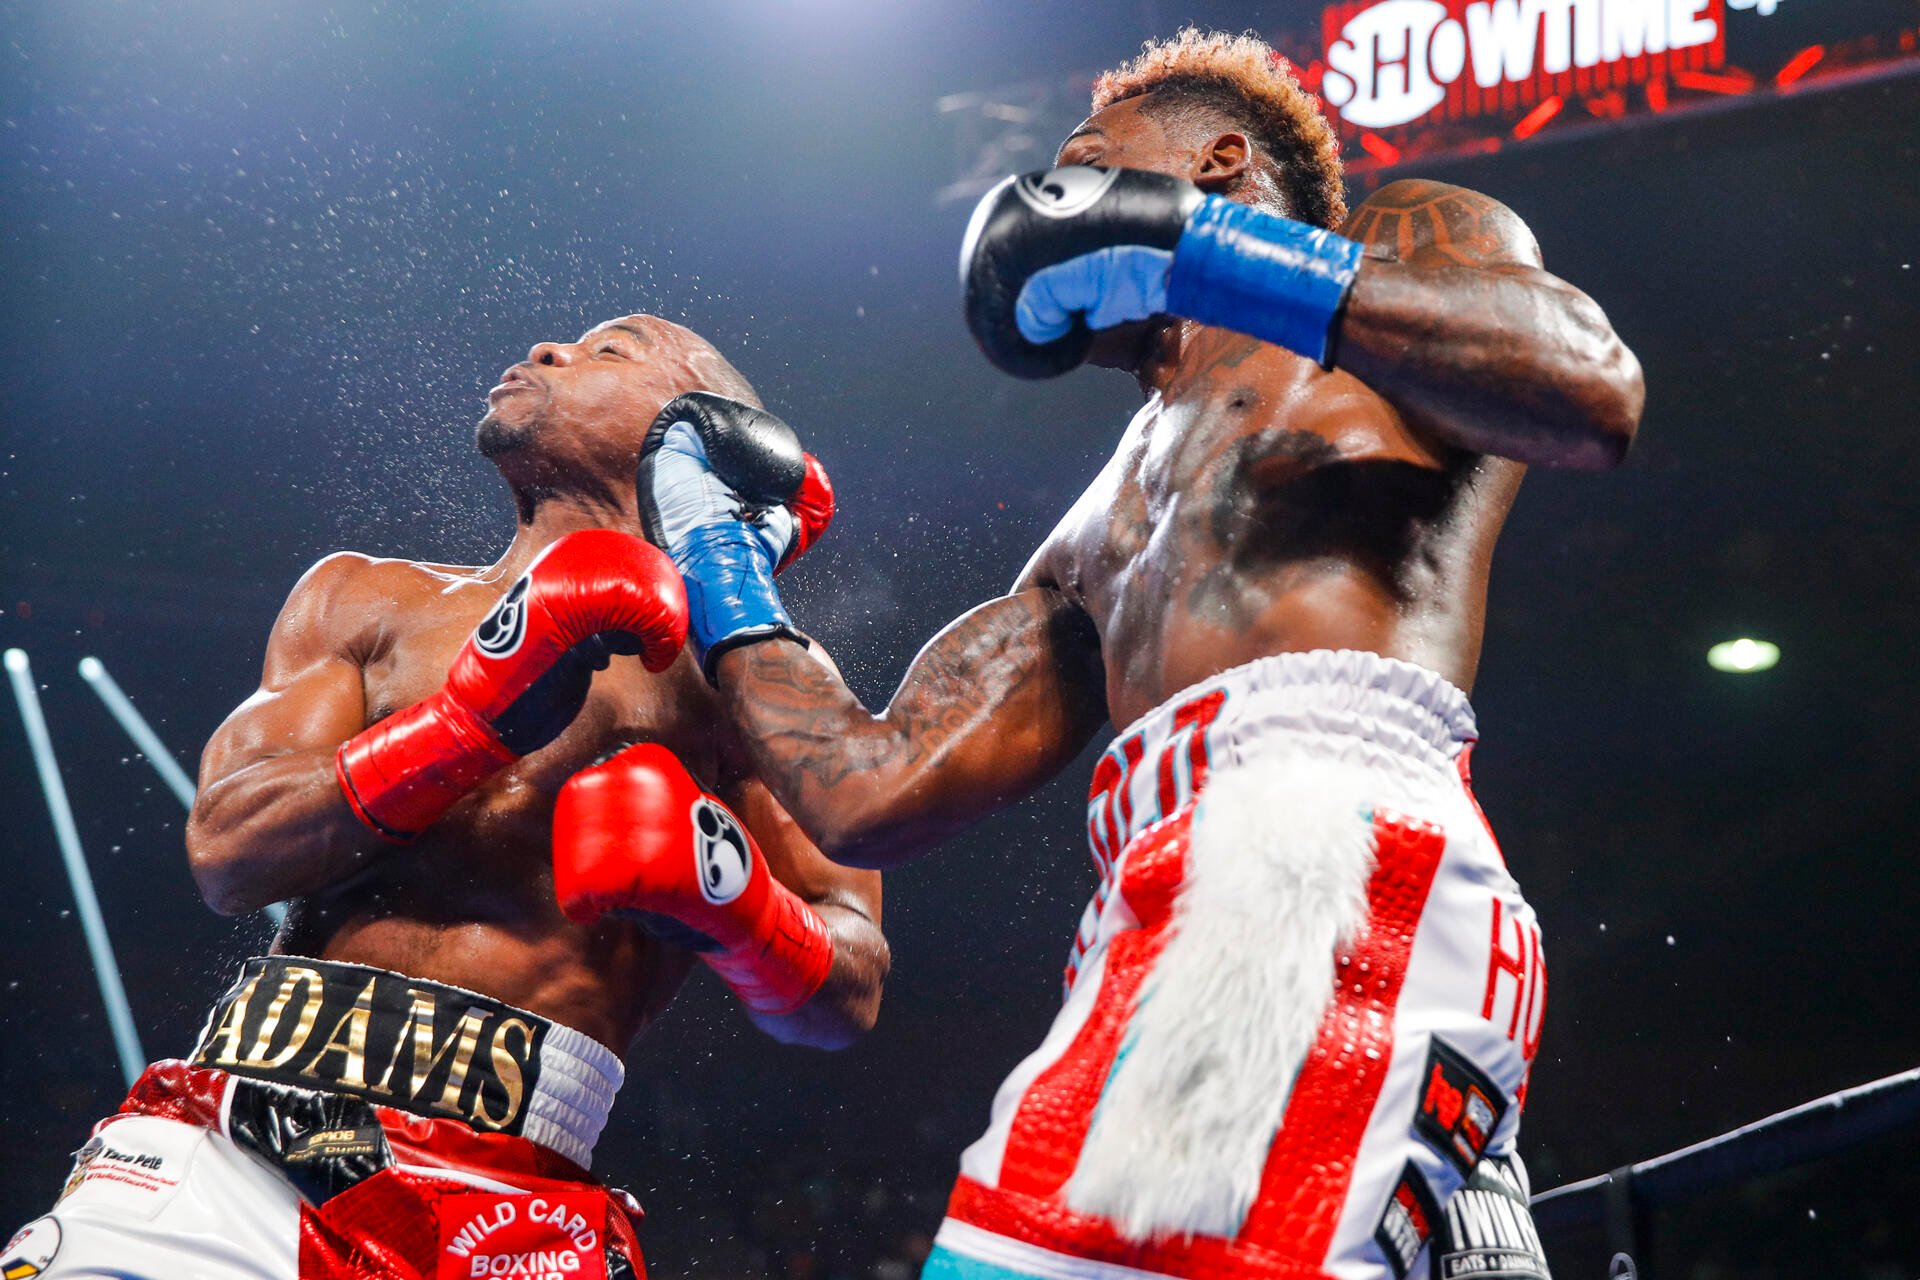 Jermall Charlo's (right) right uppercut jolted Brandon Adams more than a few times during the course of 12 rounds. Photo by Esther Lin/Showtime.